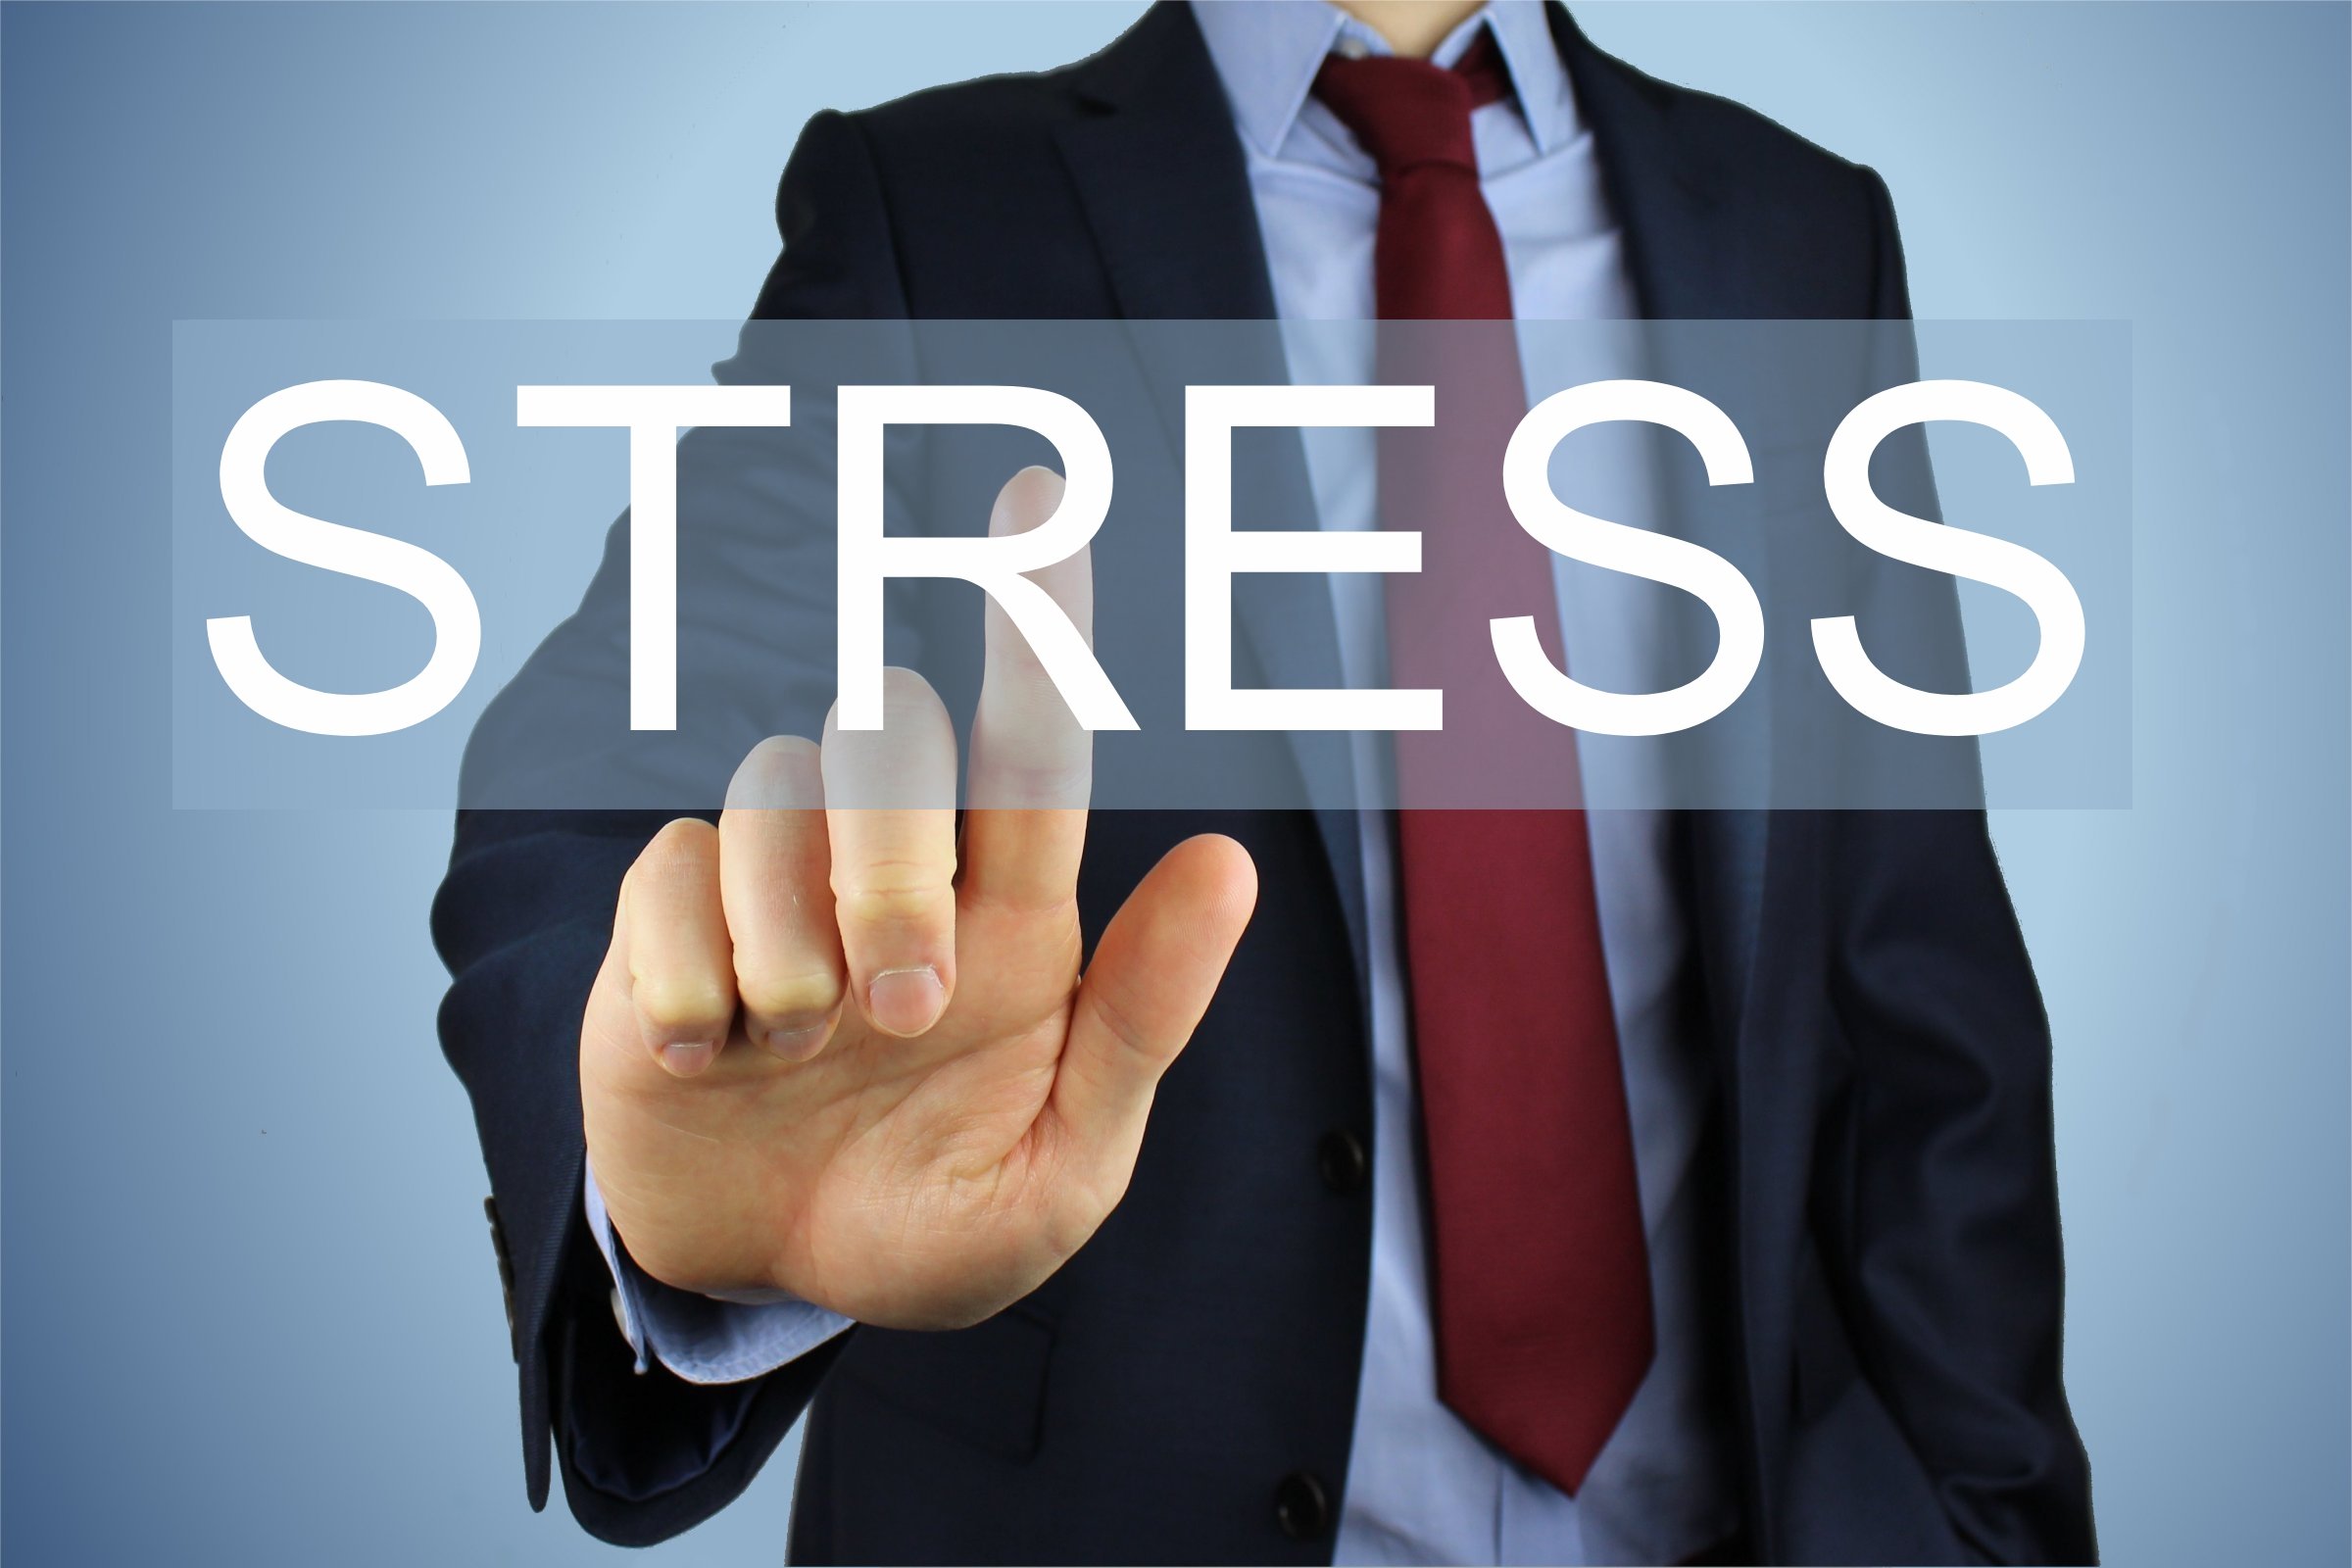 Read more about the article How Do I Free Myself from Stress?